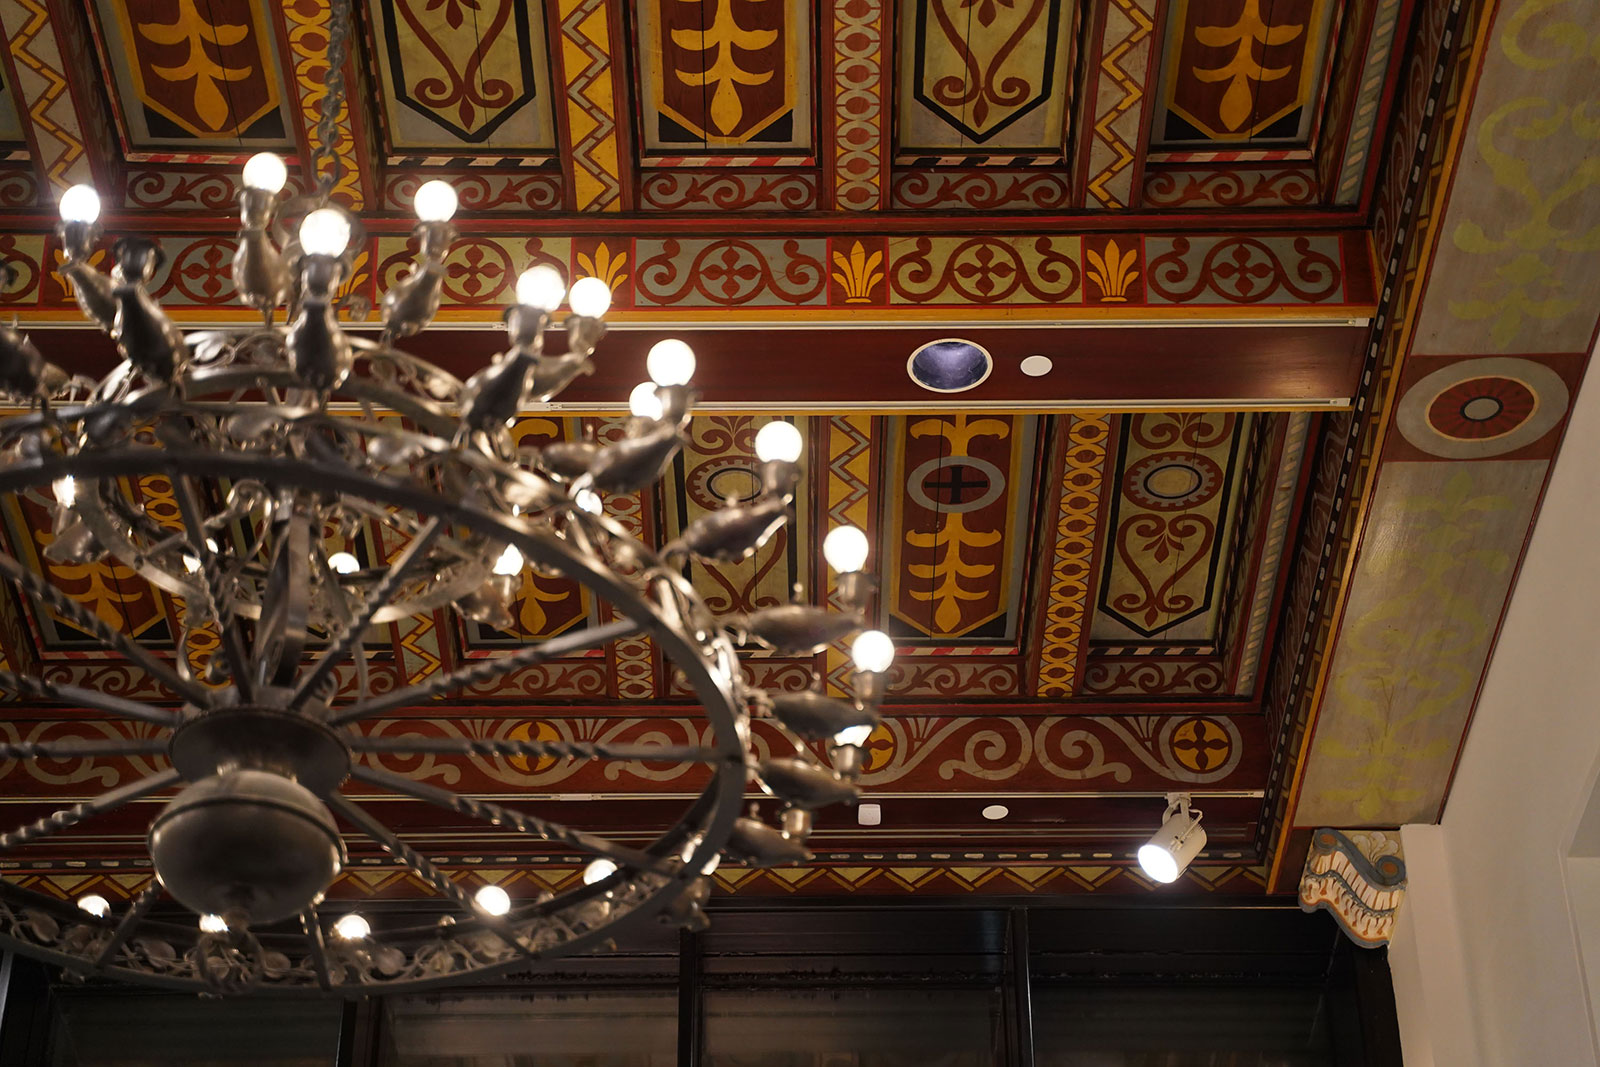 Ceiling and chandeliers